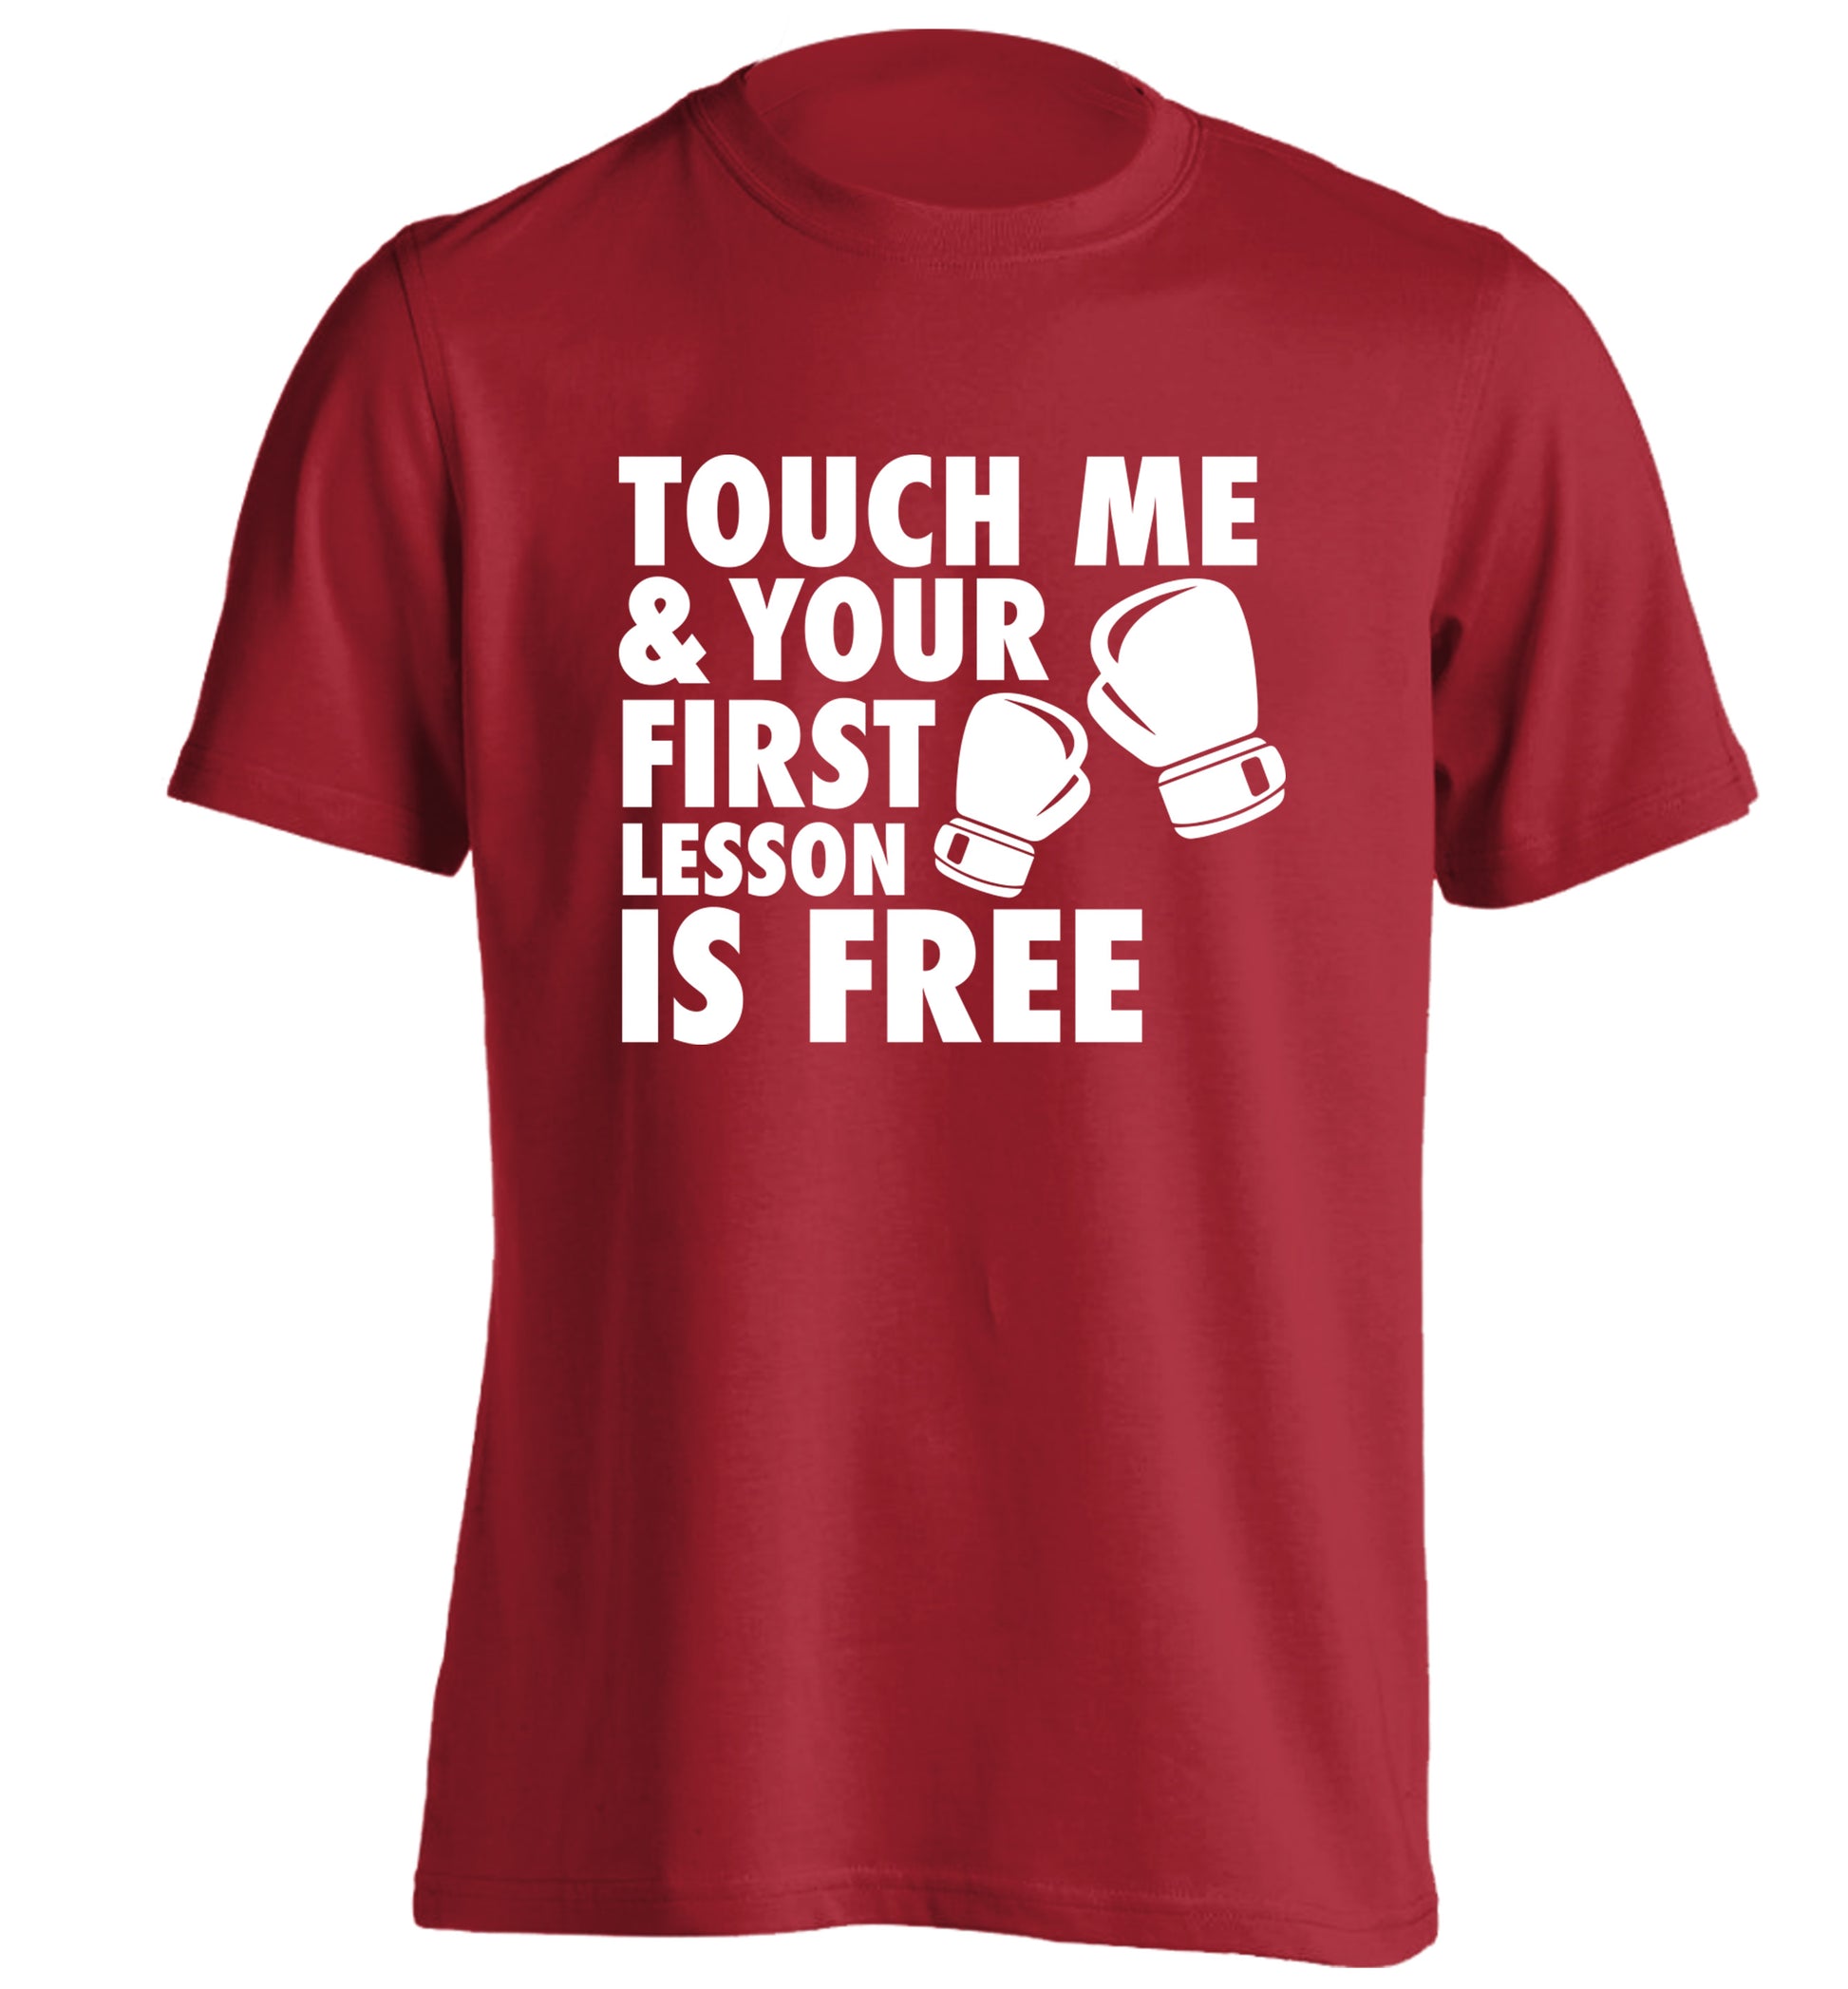 Touch me and your First Lesson is Free  adults unisex red Tshirt 2XL